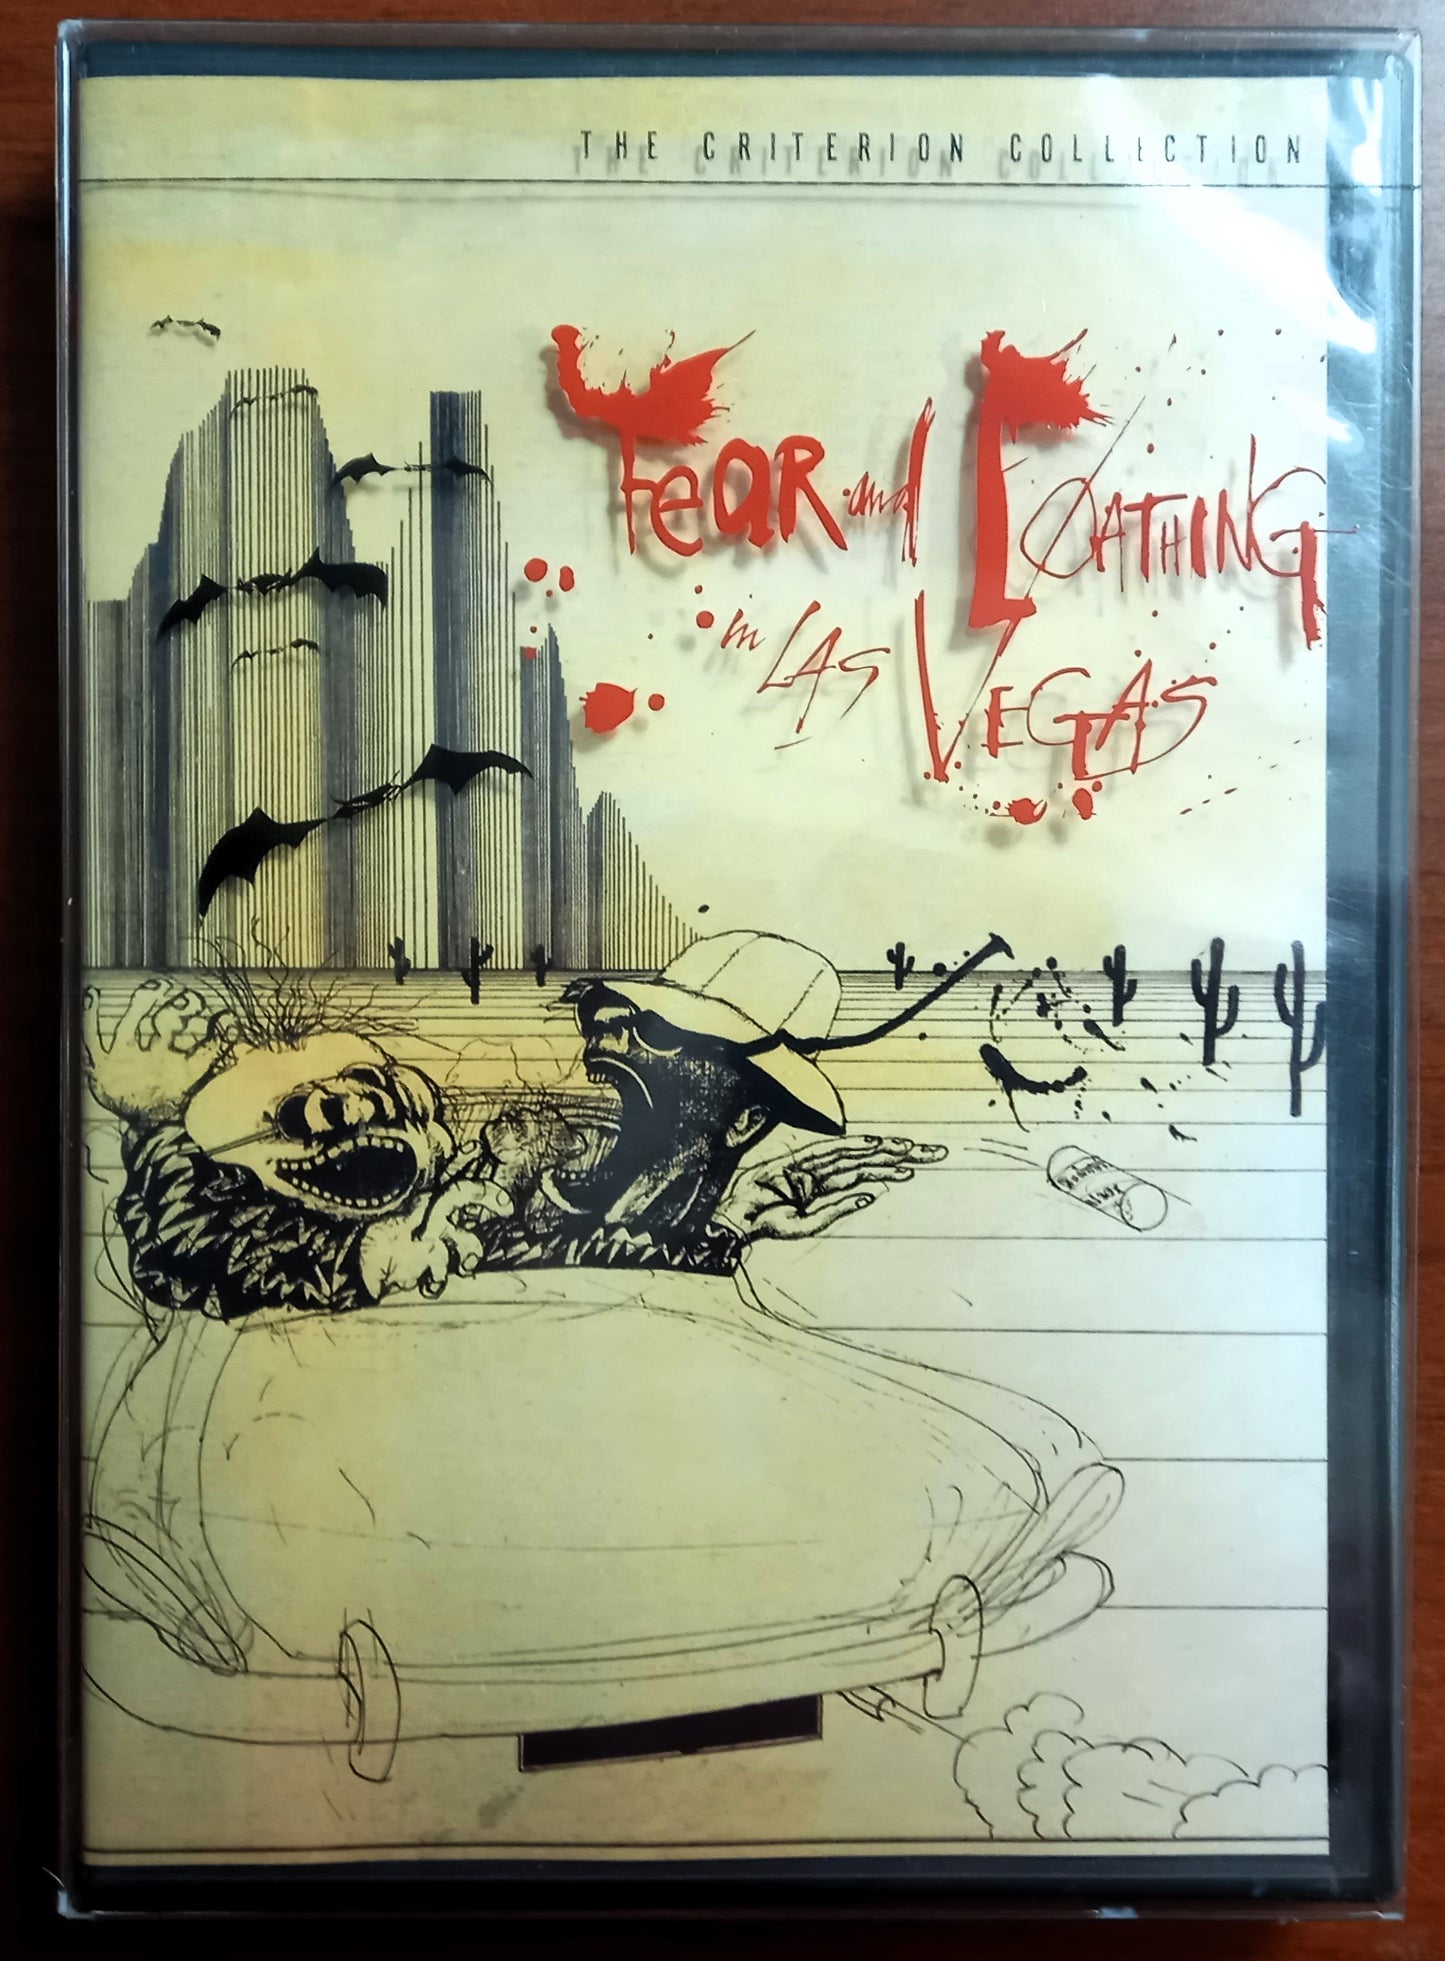 Fear and Loathing in Las Vegas - The Criterion Collection